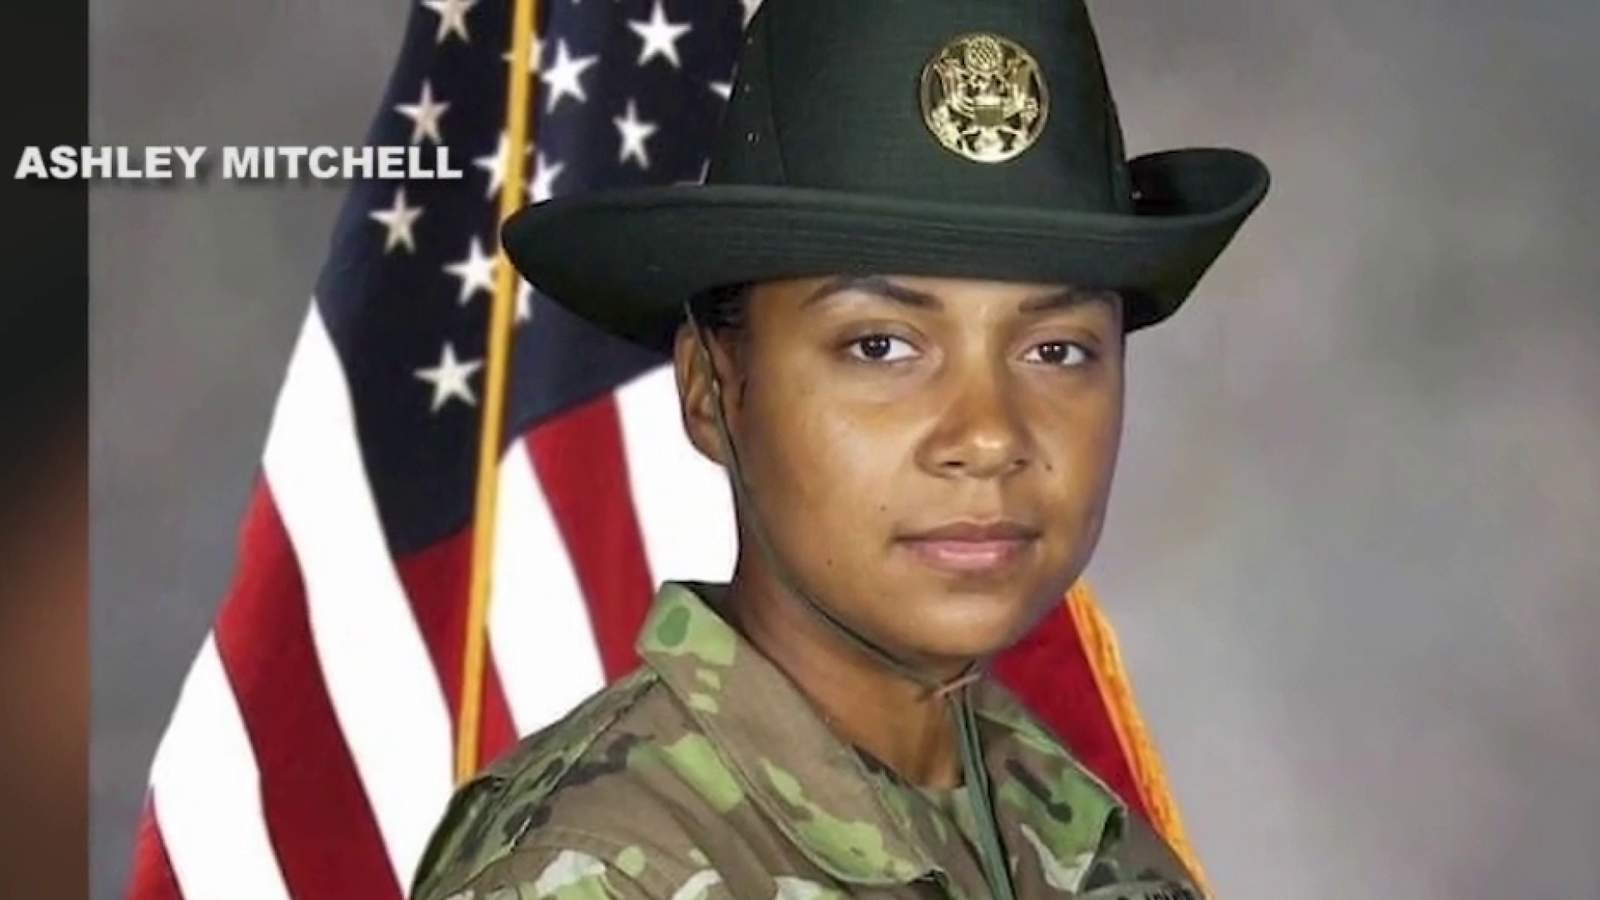 Family hit twice by gun violence remembers legacy of late Army drill sergeant